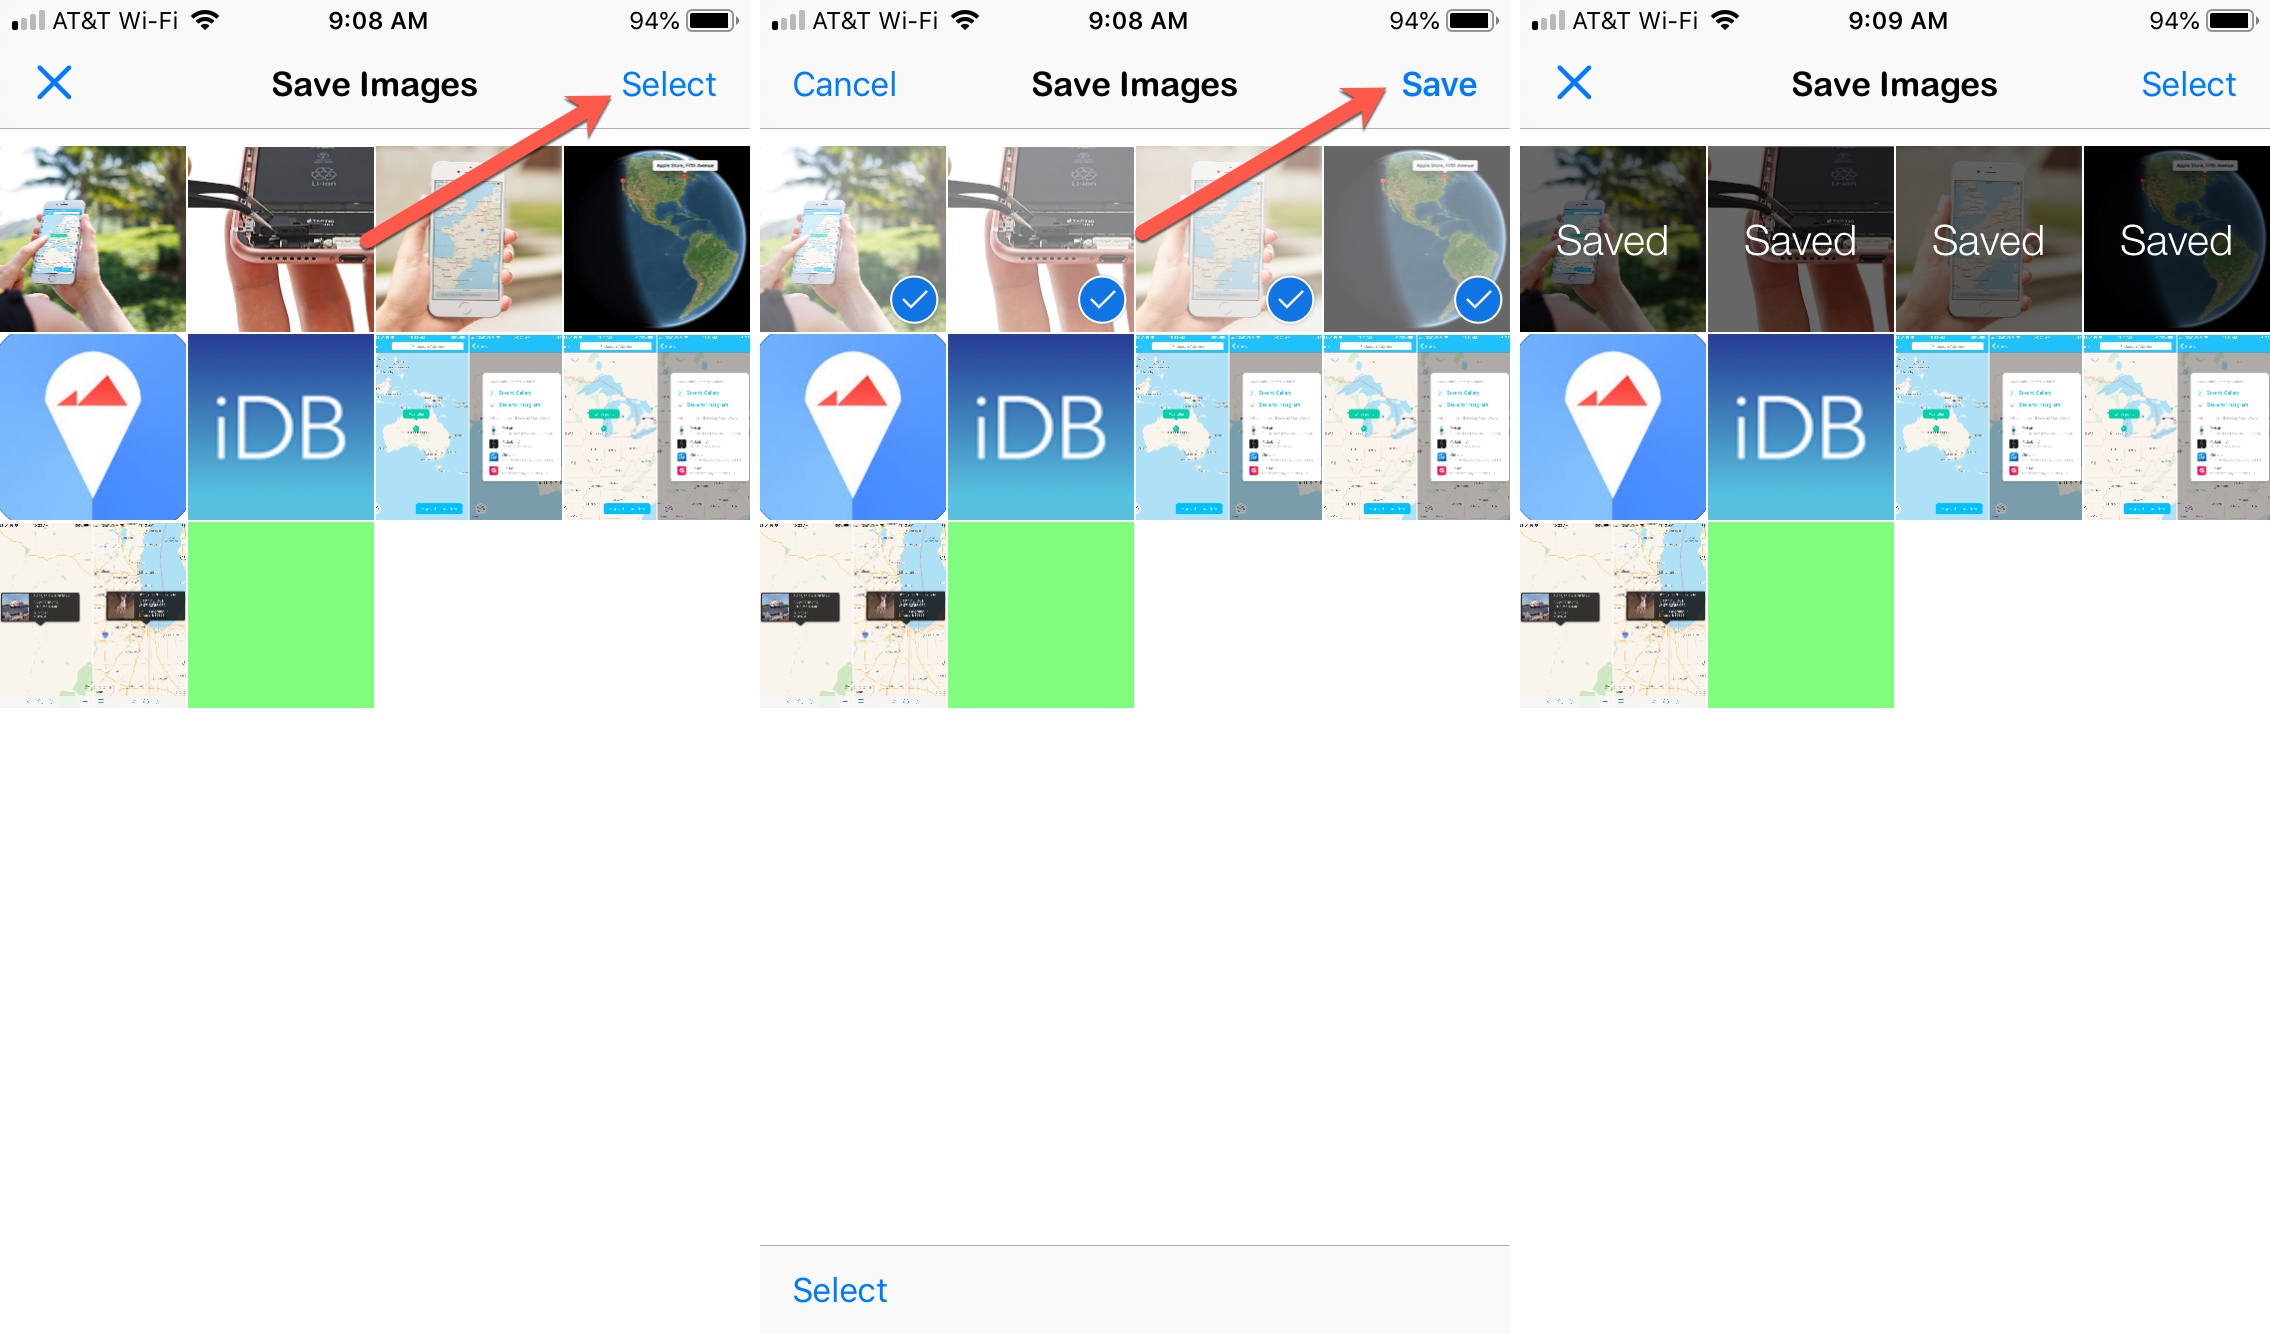 download images from a web page with Save Images on iPhone